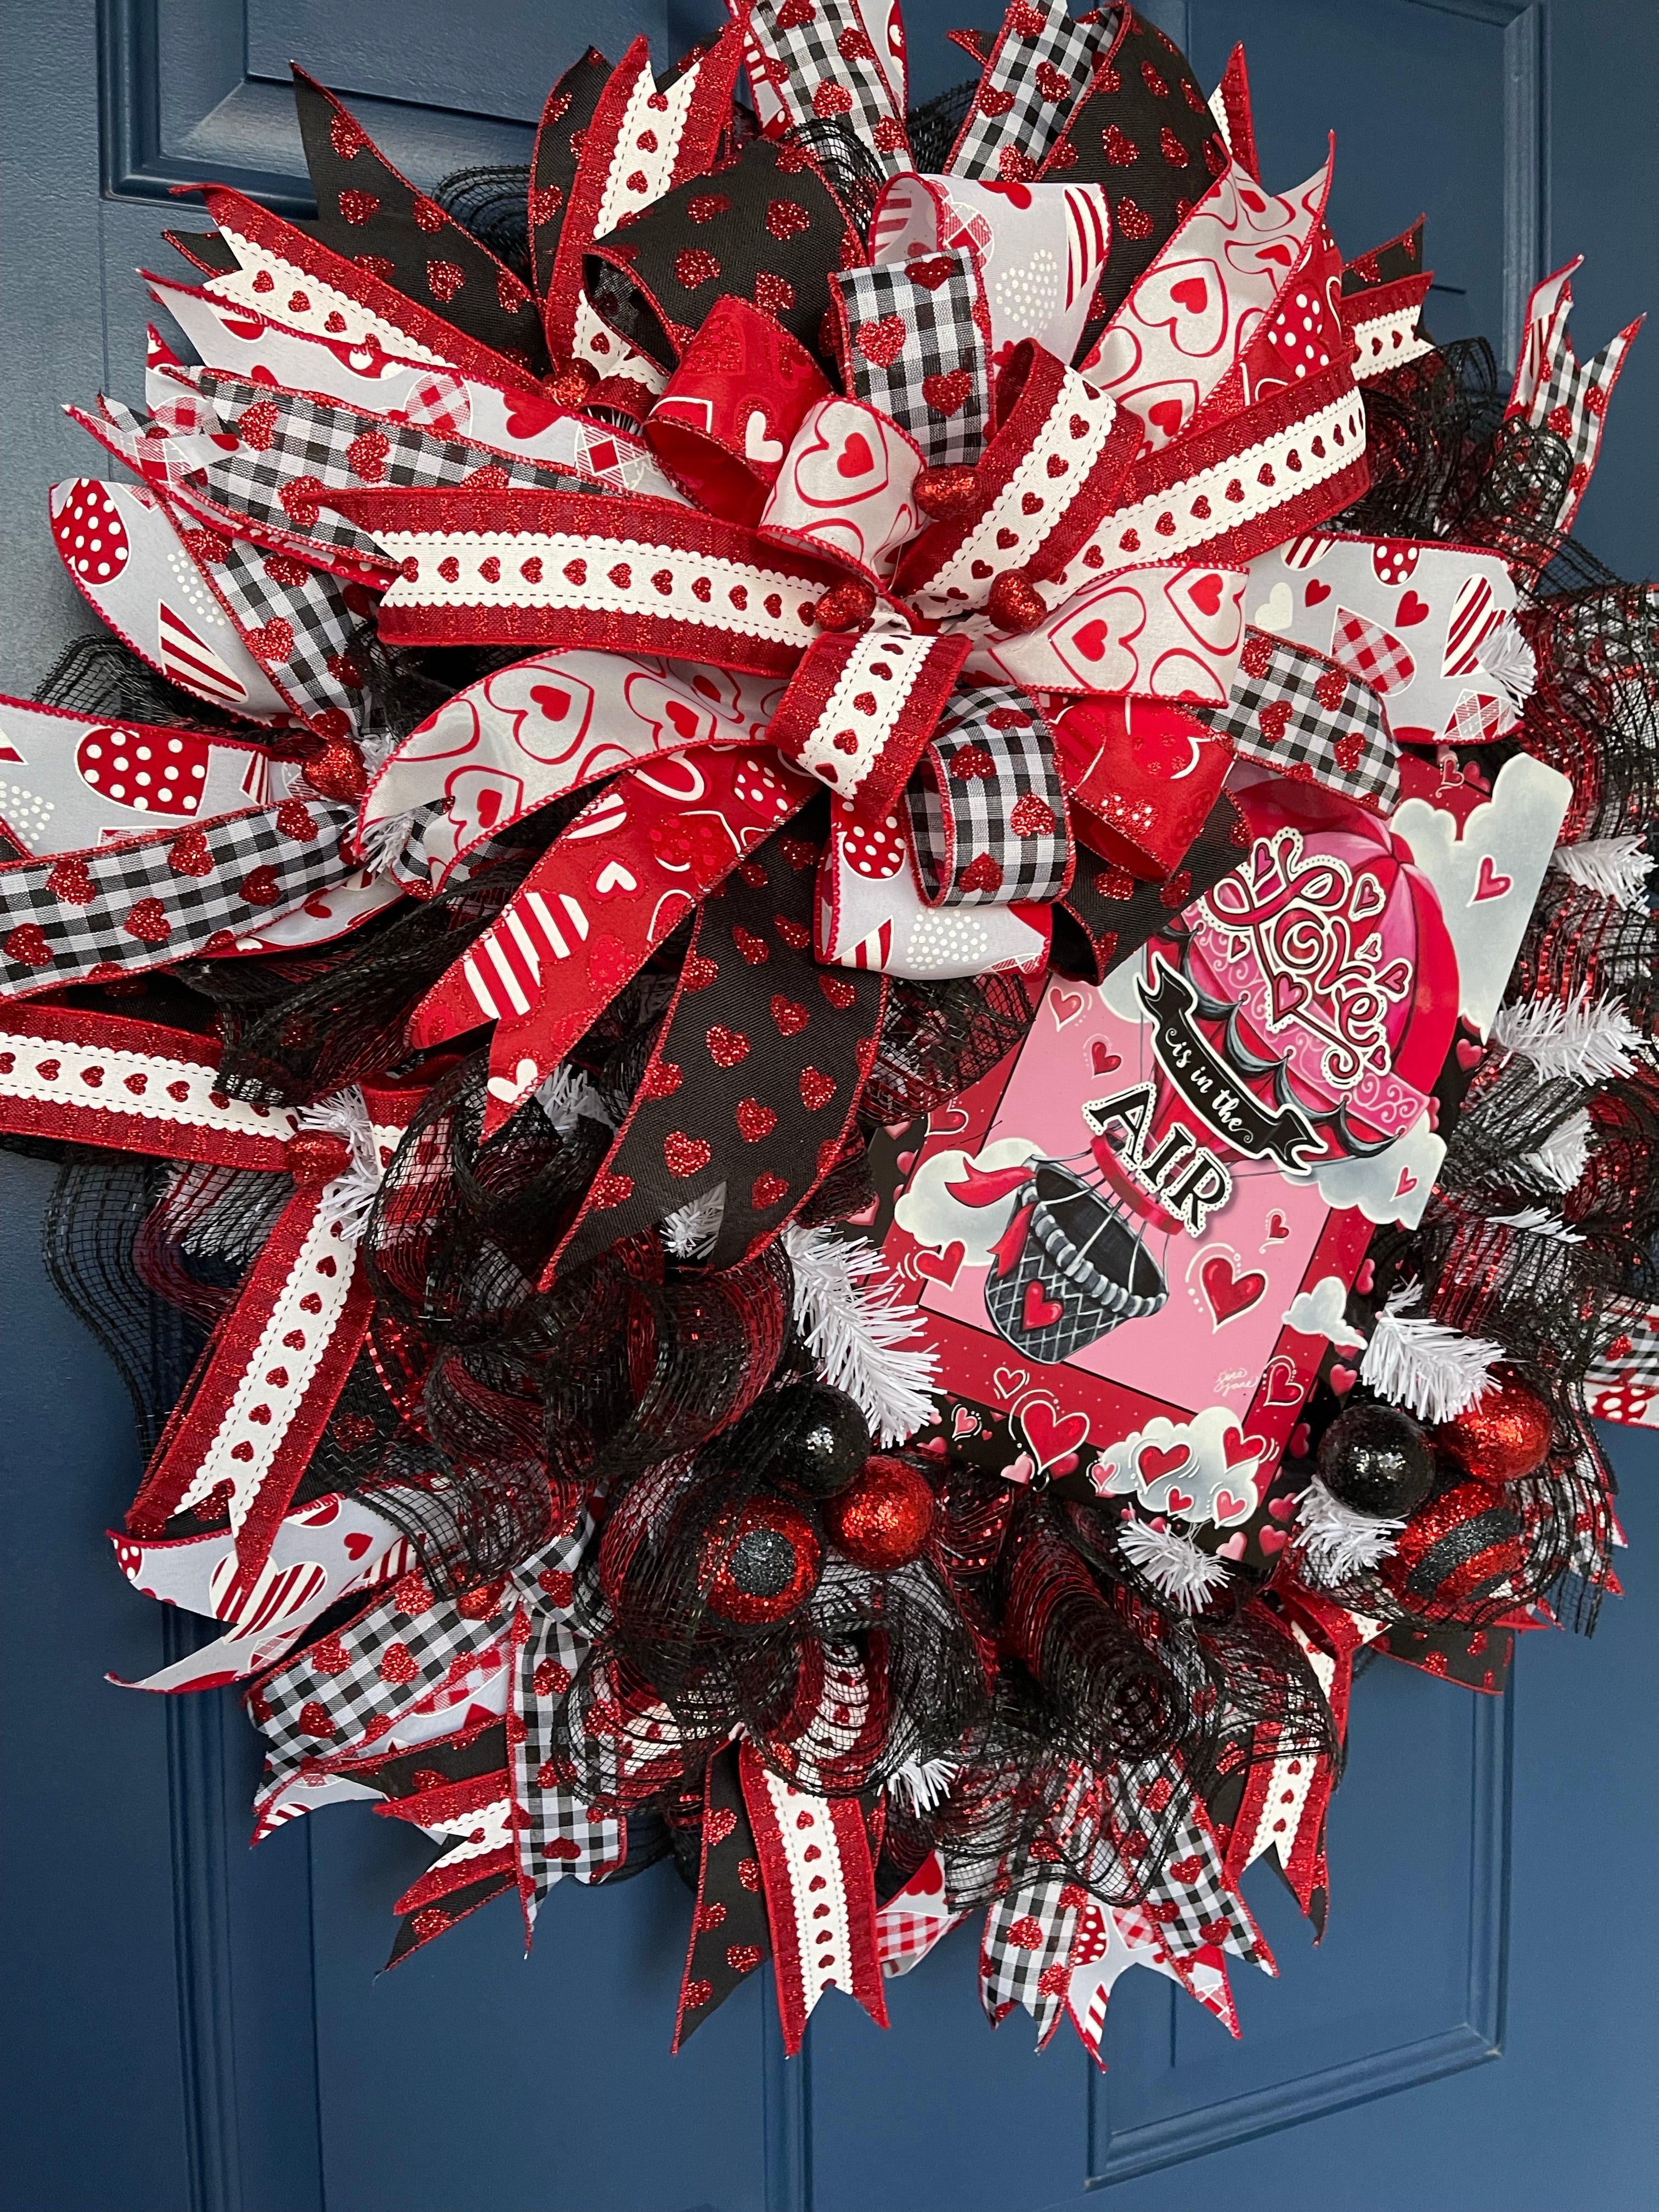 Left Side View of Red, White and Black Heart Filled Wreath with a Love its in the Air Hot Air Balloon sign on a Blue Door